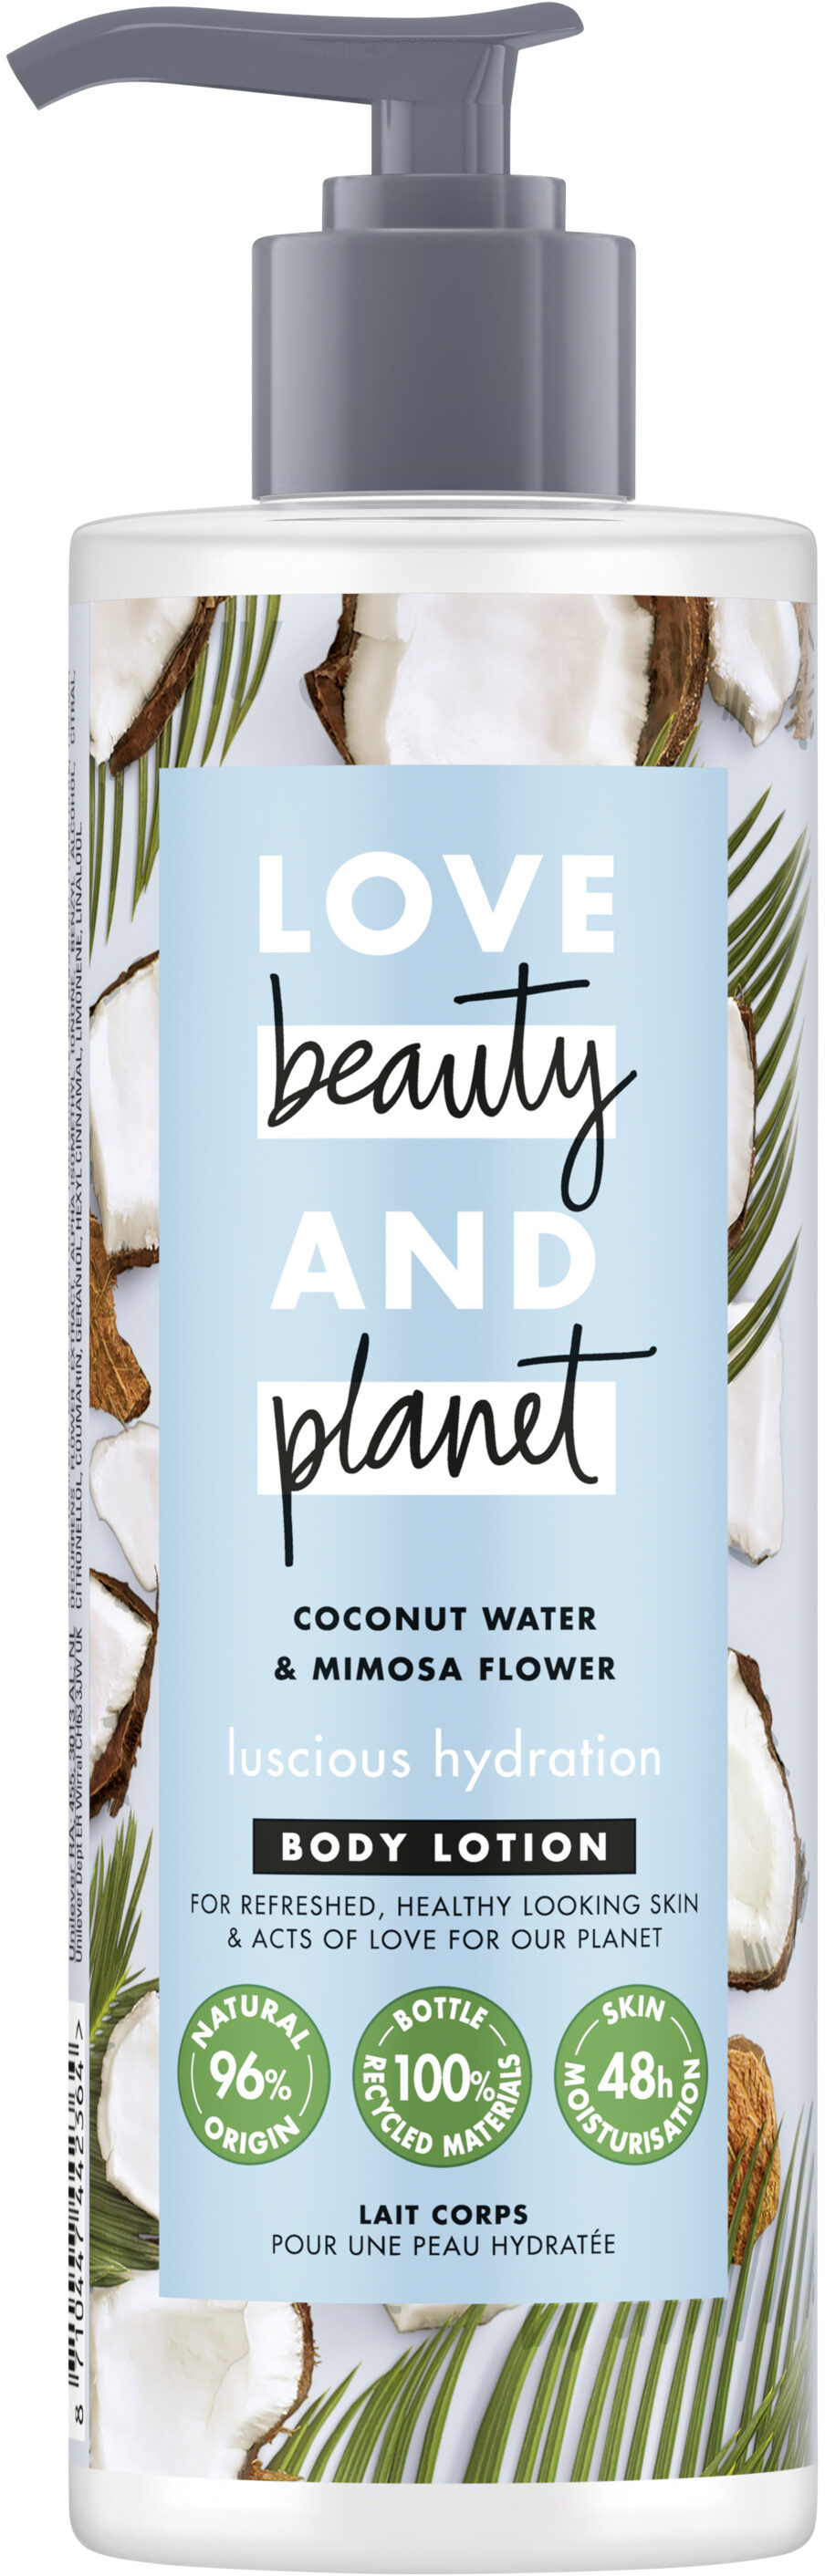 Love Beauty And Planet Lait Corps Hydratation Sublime 400ml - Product - fr